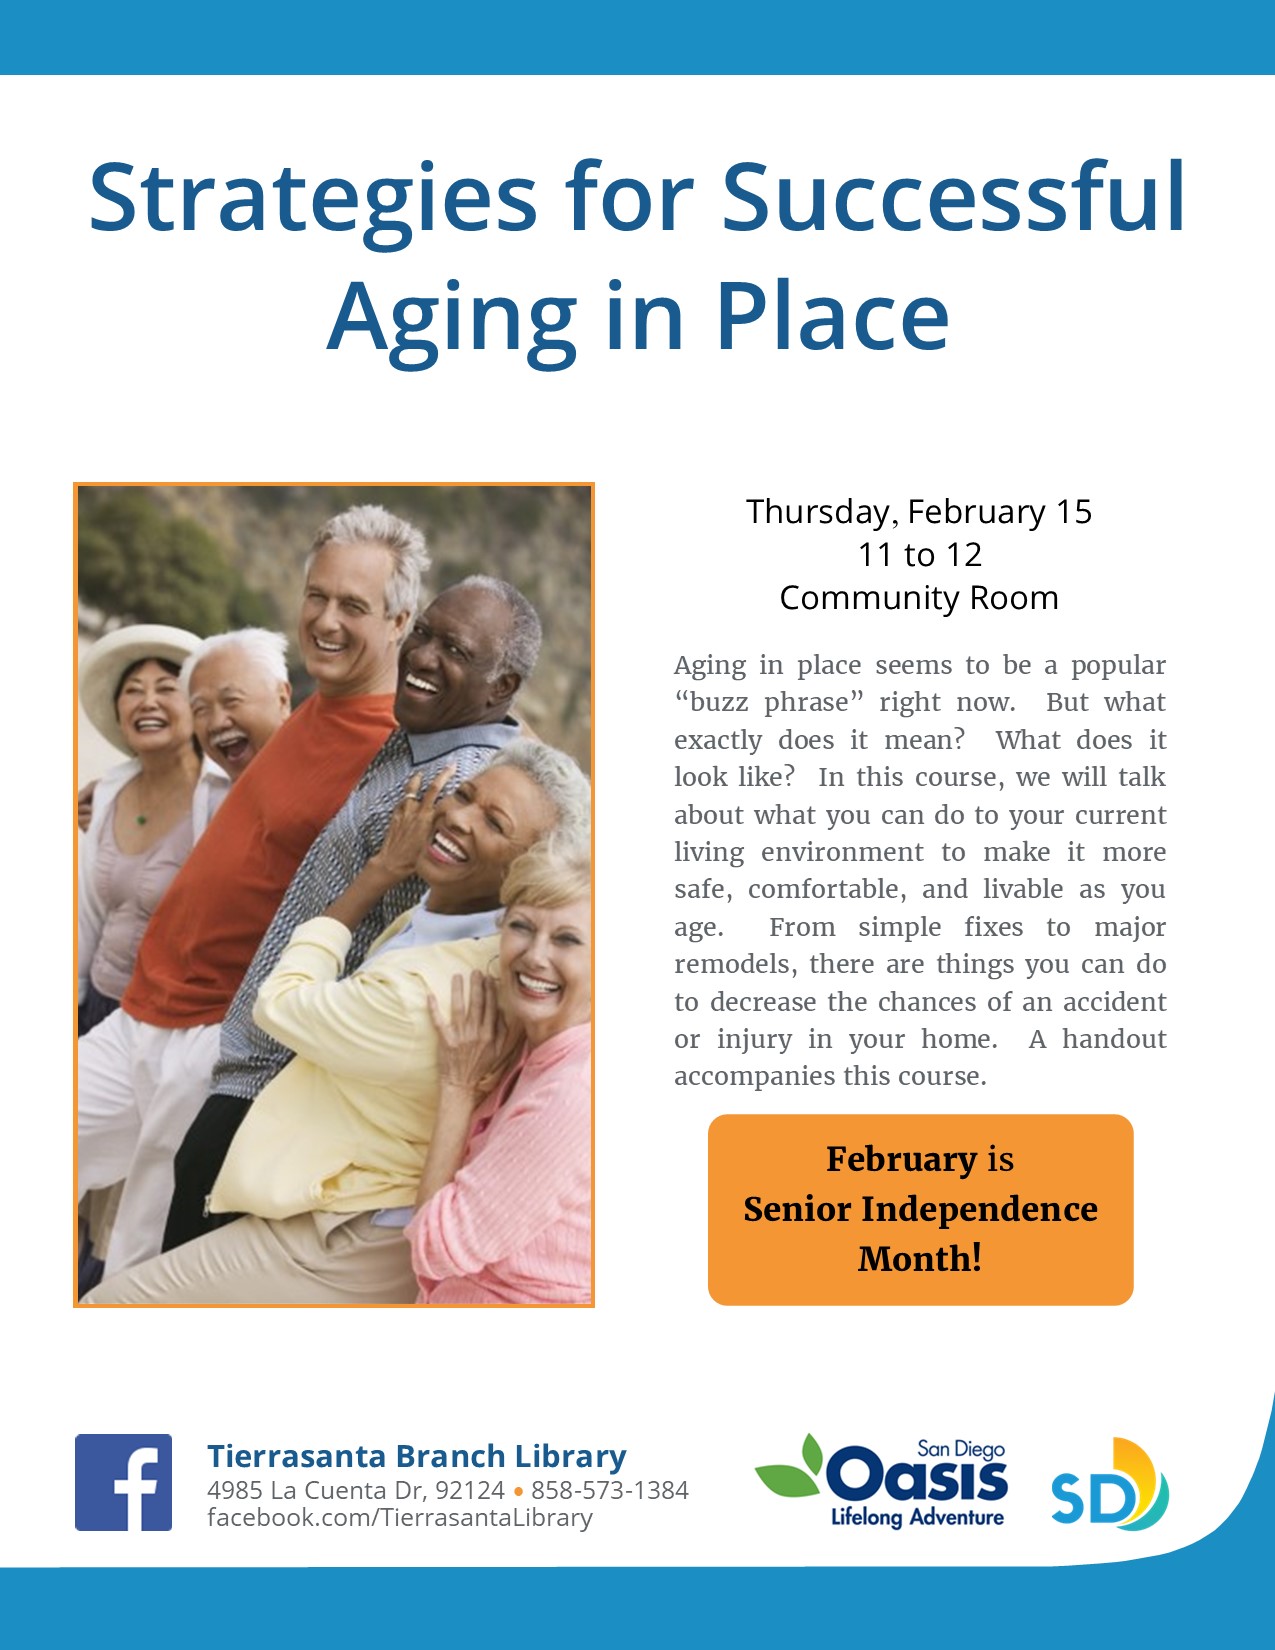 Informational program flyer with blue and orange color scheme. The flyer features an image of senior adults smiling and embracing.